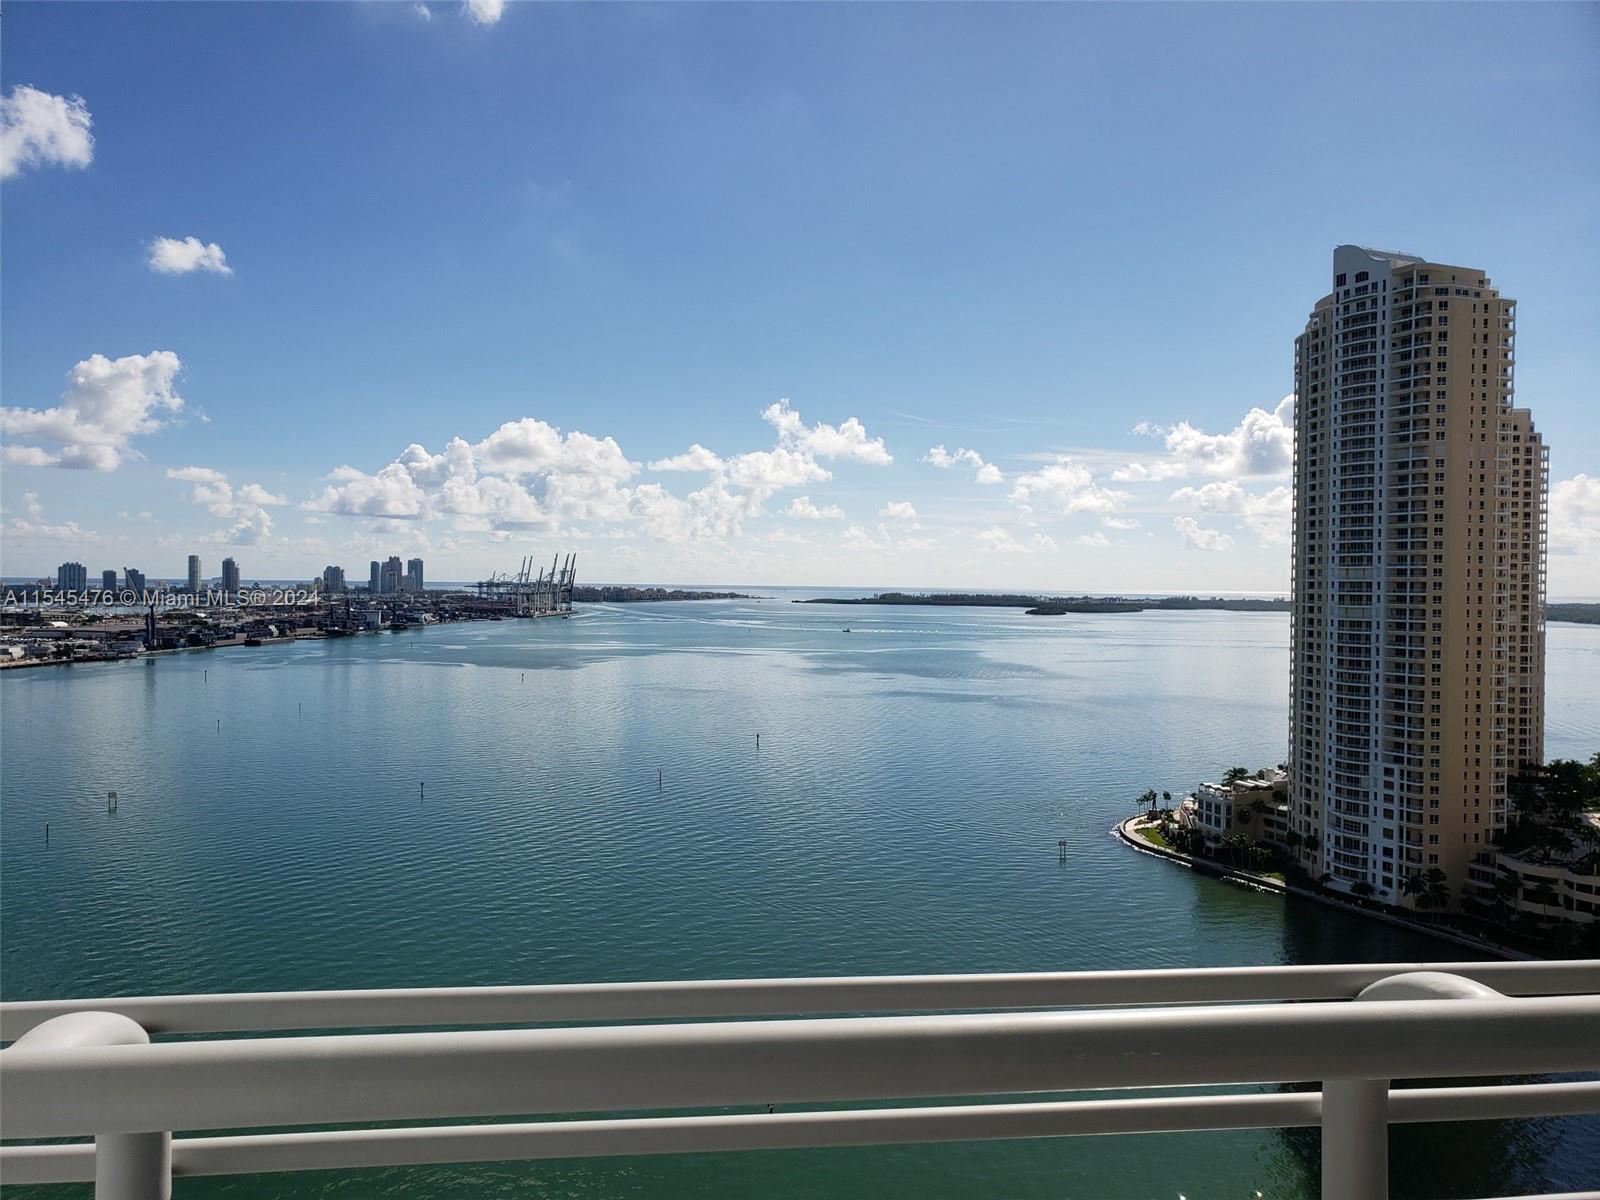 Spectacular Waterfront 3 bedrooms 2 baths Custom designer furniture tile floor with direct views of Biscayne Bay, Miami River, ocean, and Brickell Skyline Located on the 25th-floor Italian kitchen cabinets with granite countertops and marble bath A countertops. The pool is under construction, 2 party rooms, two gyms, a convenience store, 24/7 security, and valet service. Centrally located Whole Food, CVS, restaurants, Banks, FedEx, USPS, 4 & 5 stars Hotels, Bayfront Park, Bayside, AA Arena, minutes to Brickell, CITI CENTRE, Sobe, Key Biscayne, Gables, Grove, Design District, and Airport. Enjoy the lifestyle Pool in under constructions